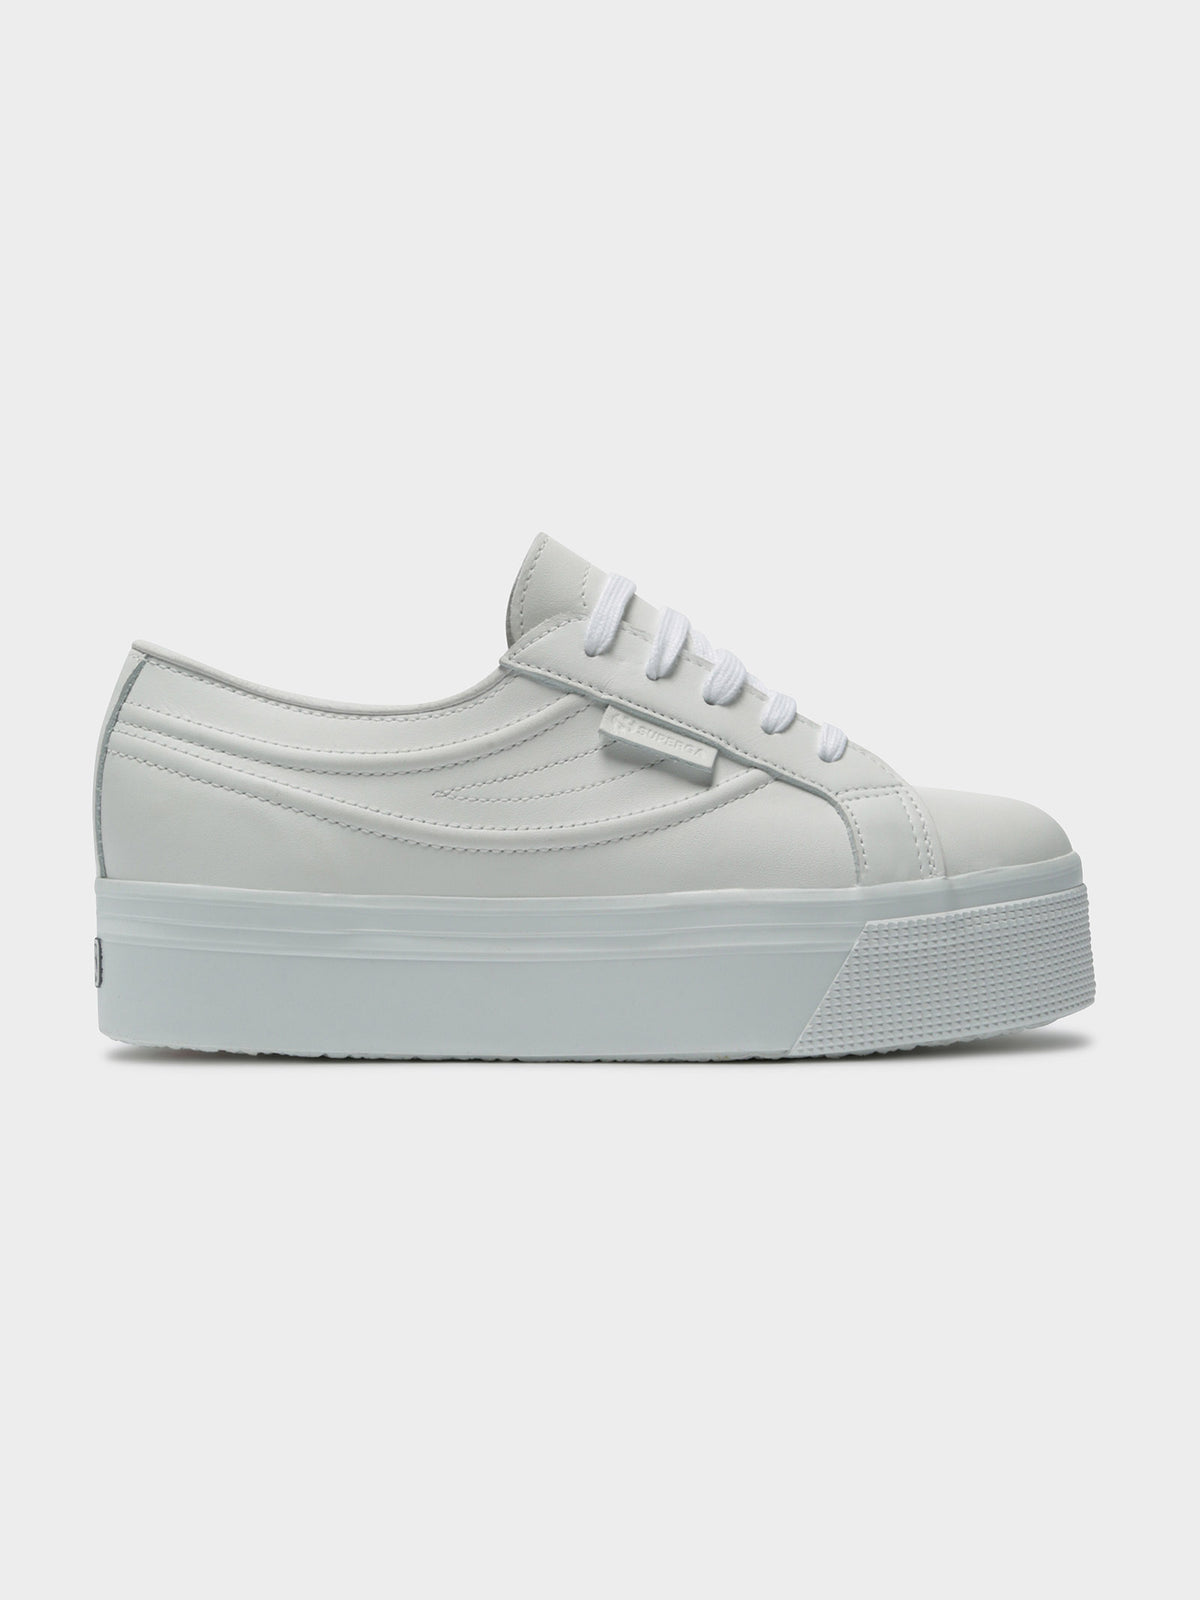 Womens 2790 Leather Nappa Swallow Sneakers in White